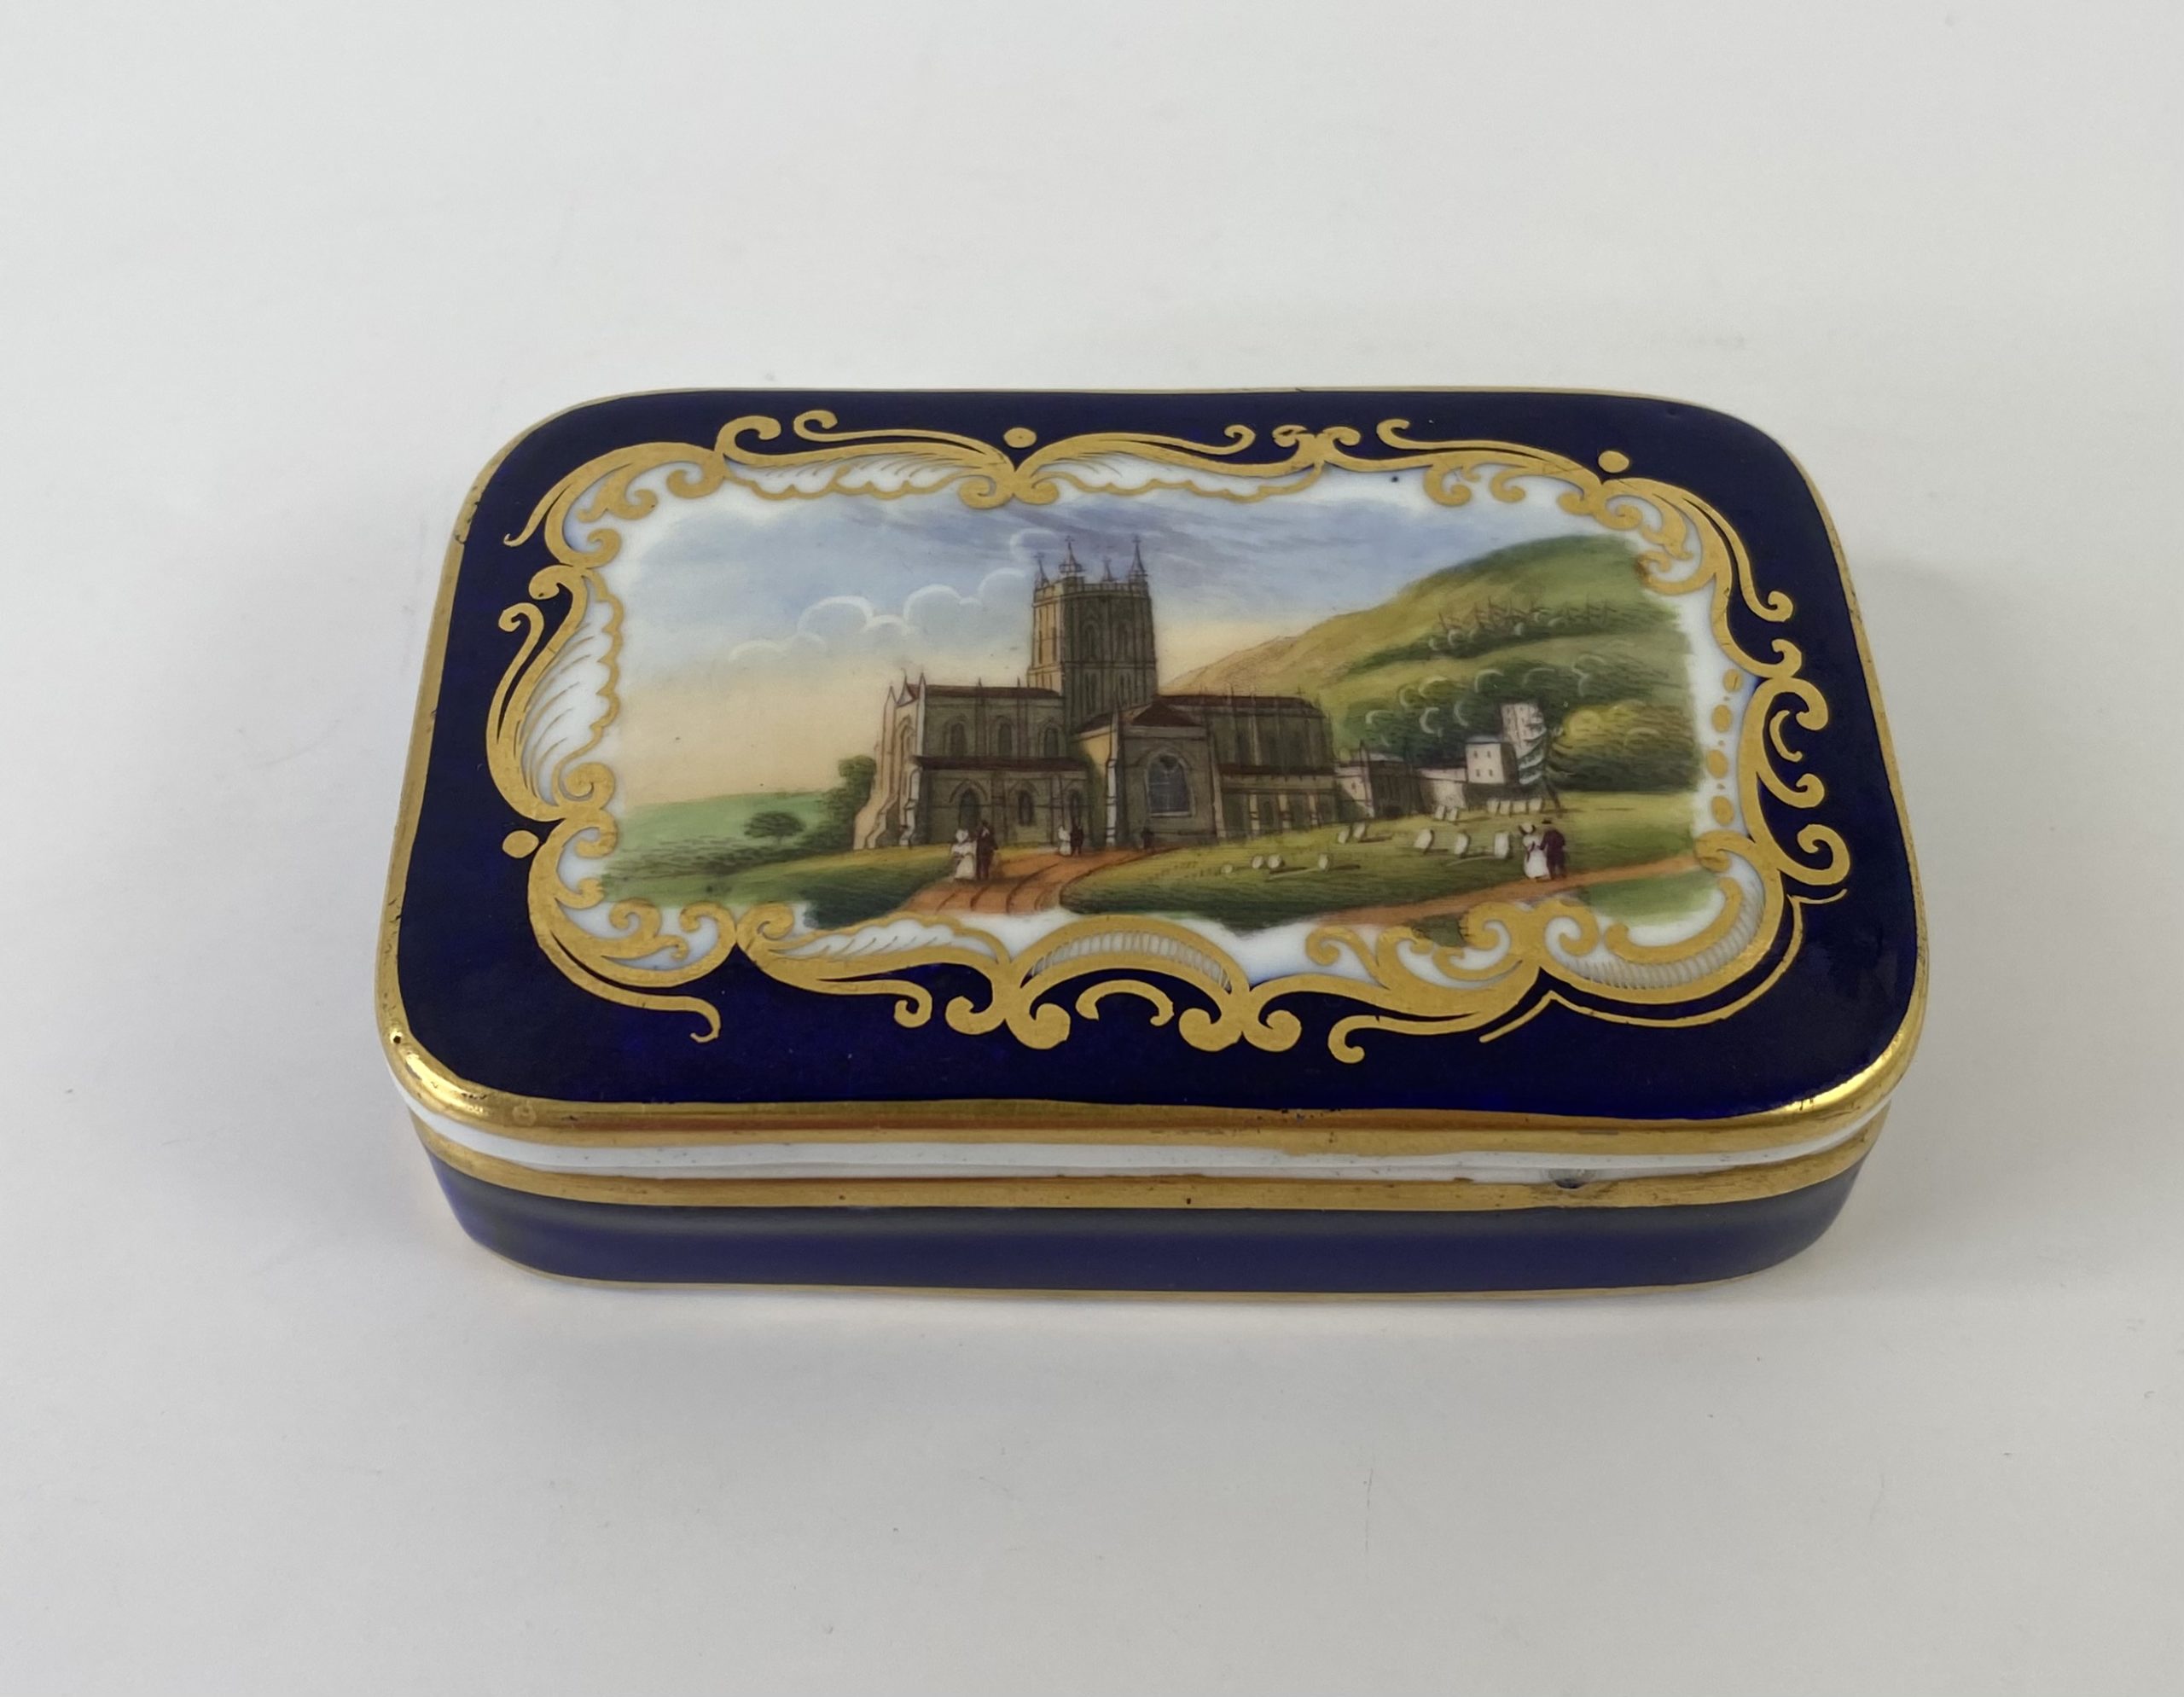 Chamberlains Worcester box and cover, ‘Malvern’, c.1840.